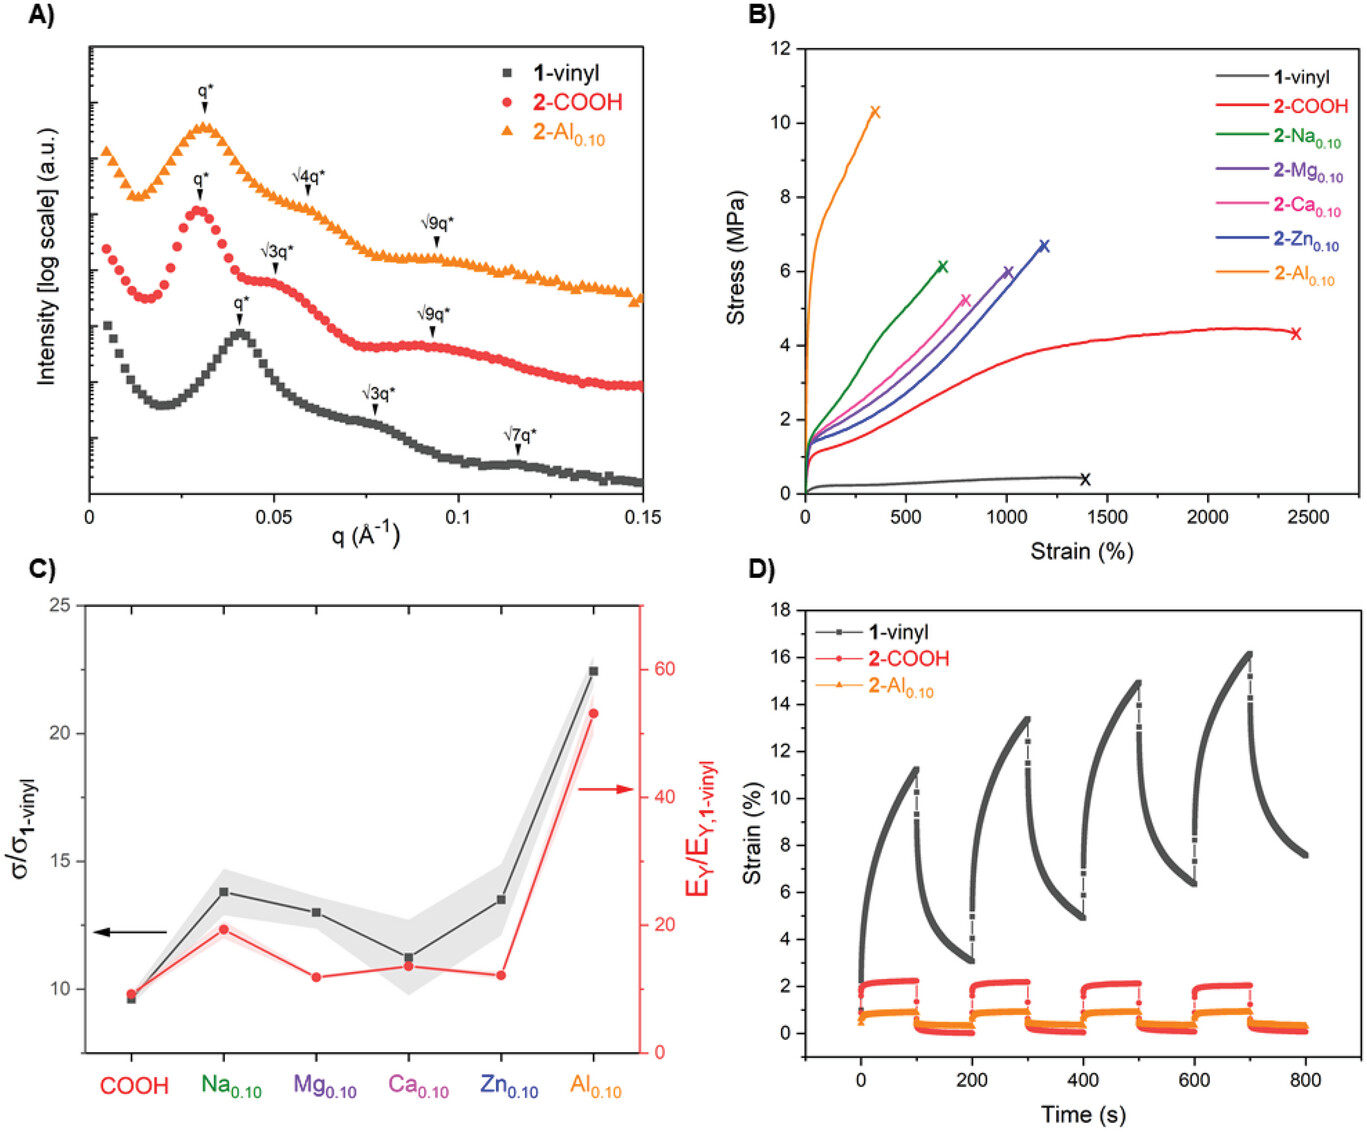 SAXS and mechanical properties of CO2-derived triblock copolymer elastomers. A) Room-temperature small-angle X-ray scattering (SAXS) profiles showing principle scattering peaks (q*) and higher-order peaks (q/q*). B) Representative stress–strain curves (10 mm min−1 extension rate). C) Improvement in tensile strength and Young's modulus relative to unfunctionalized 1-vinyl. D) Creep-recovery experiments at 30 °C, 5 kPa.